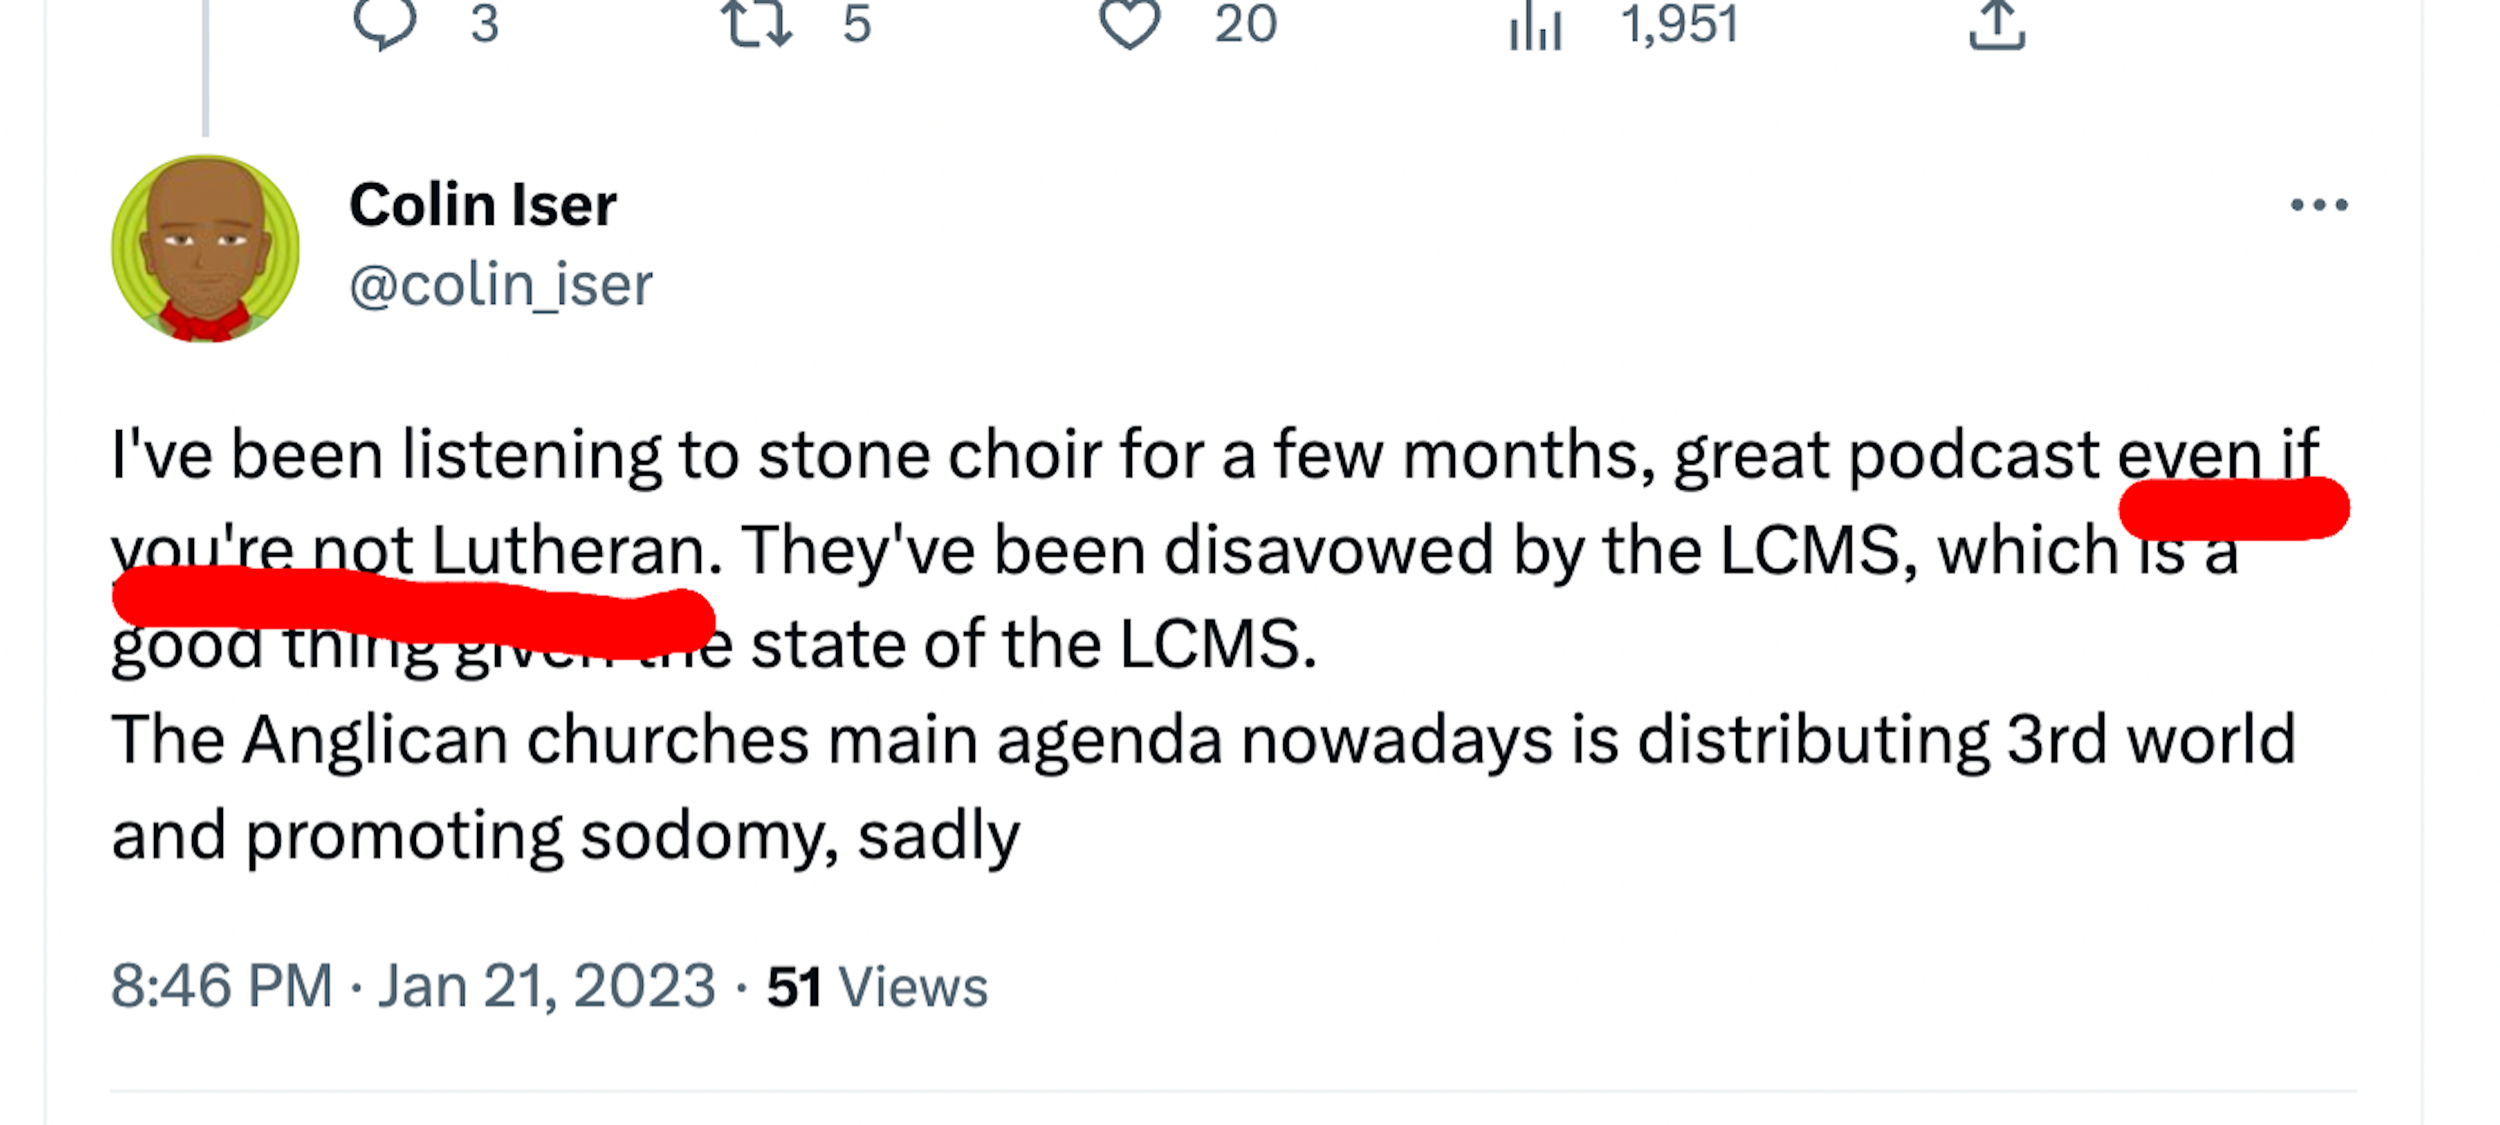 Twitter user "Colin iser": "I've been listening to Stone Choir for a few months, great podcast even if you're not Lutheran. They've been disavowed by the LCMS, which is a good thing given the state of the LCMS. The Anglican churches main agenda nowadays is distributing 3rd world and promoting sodomy, sadly"